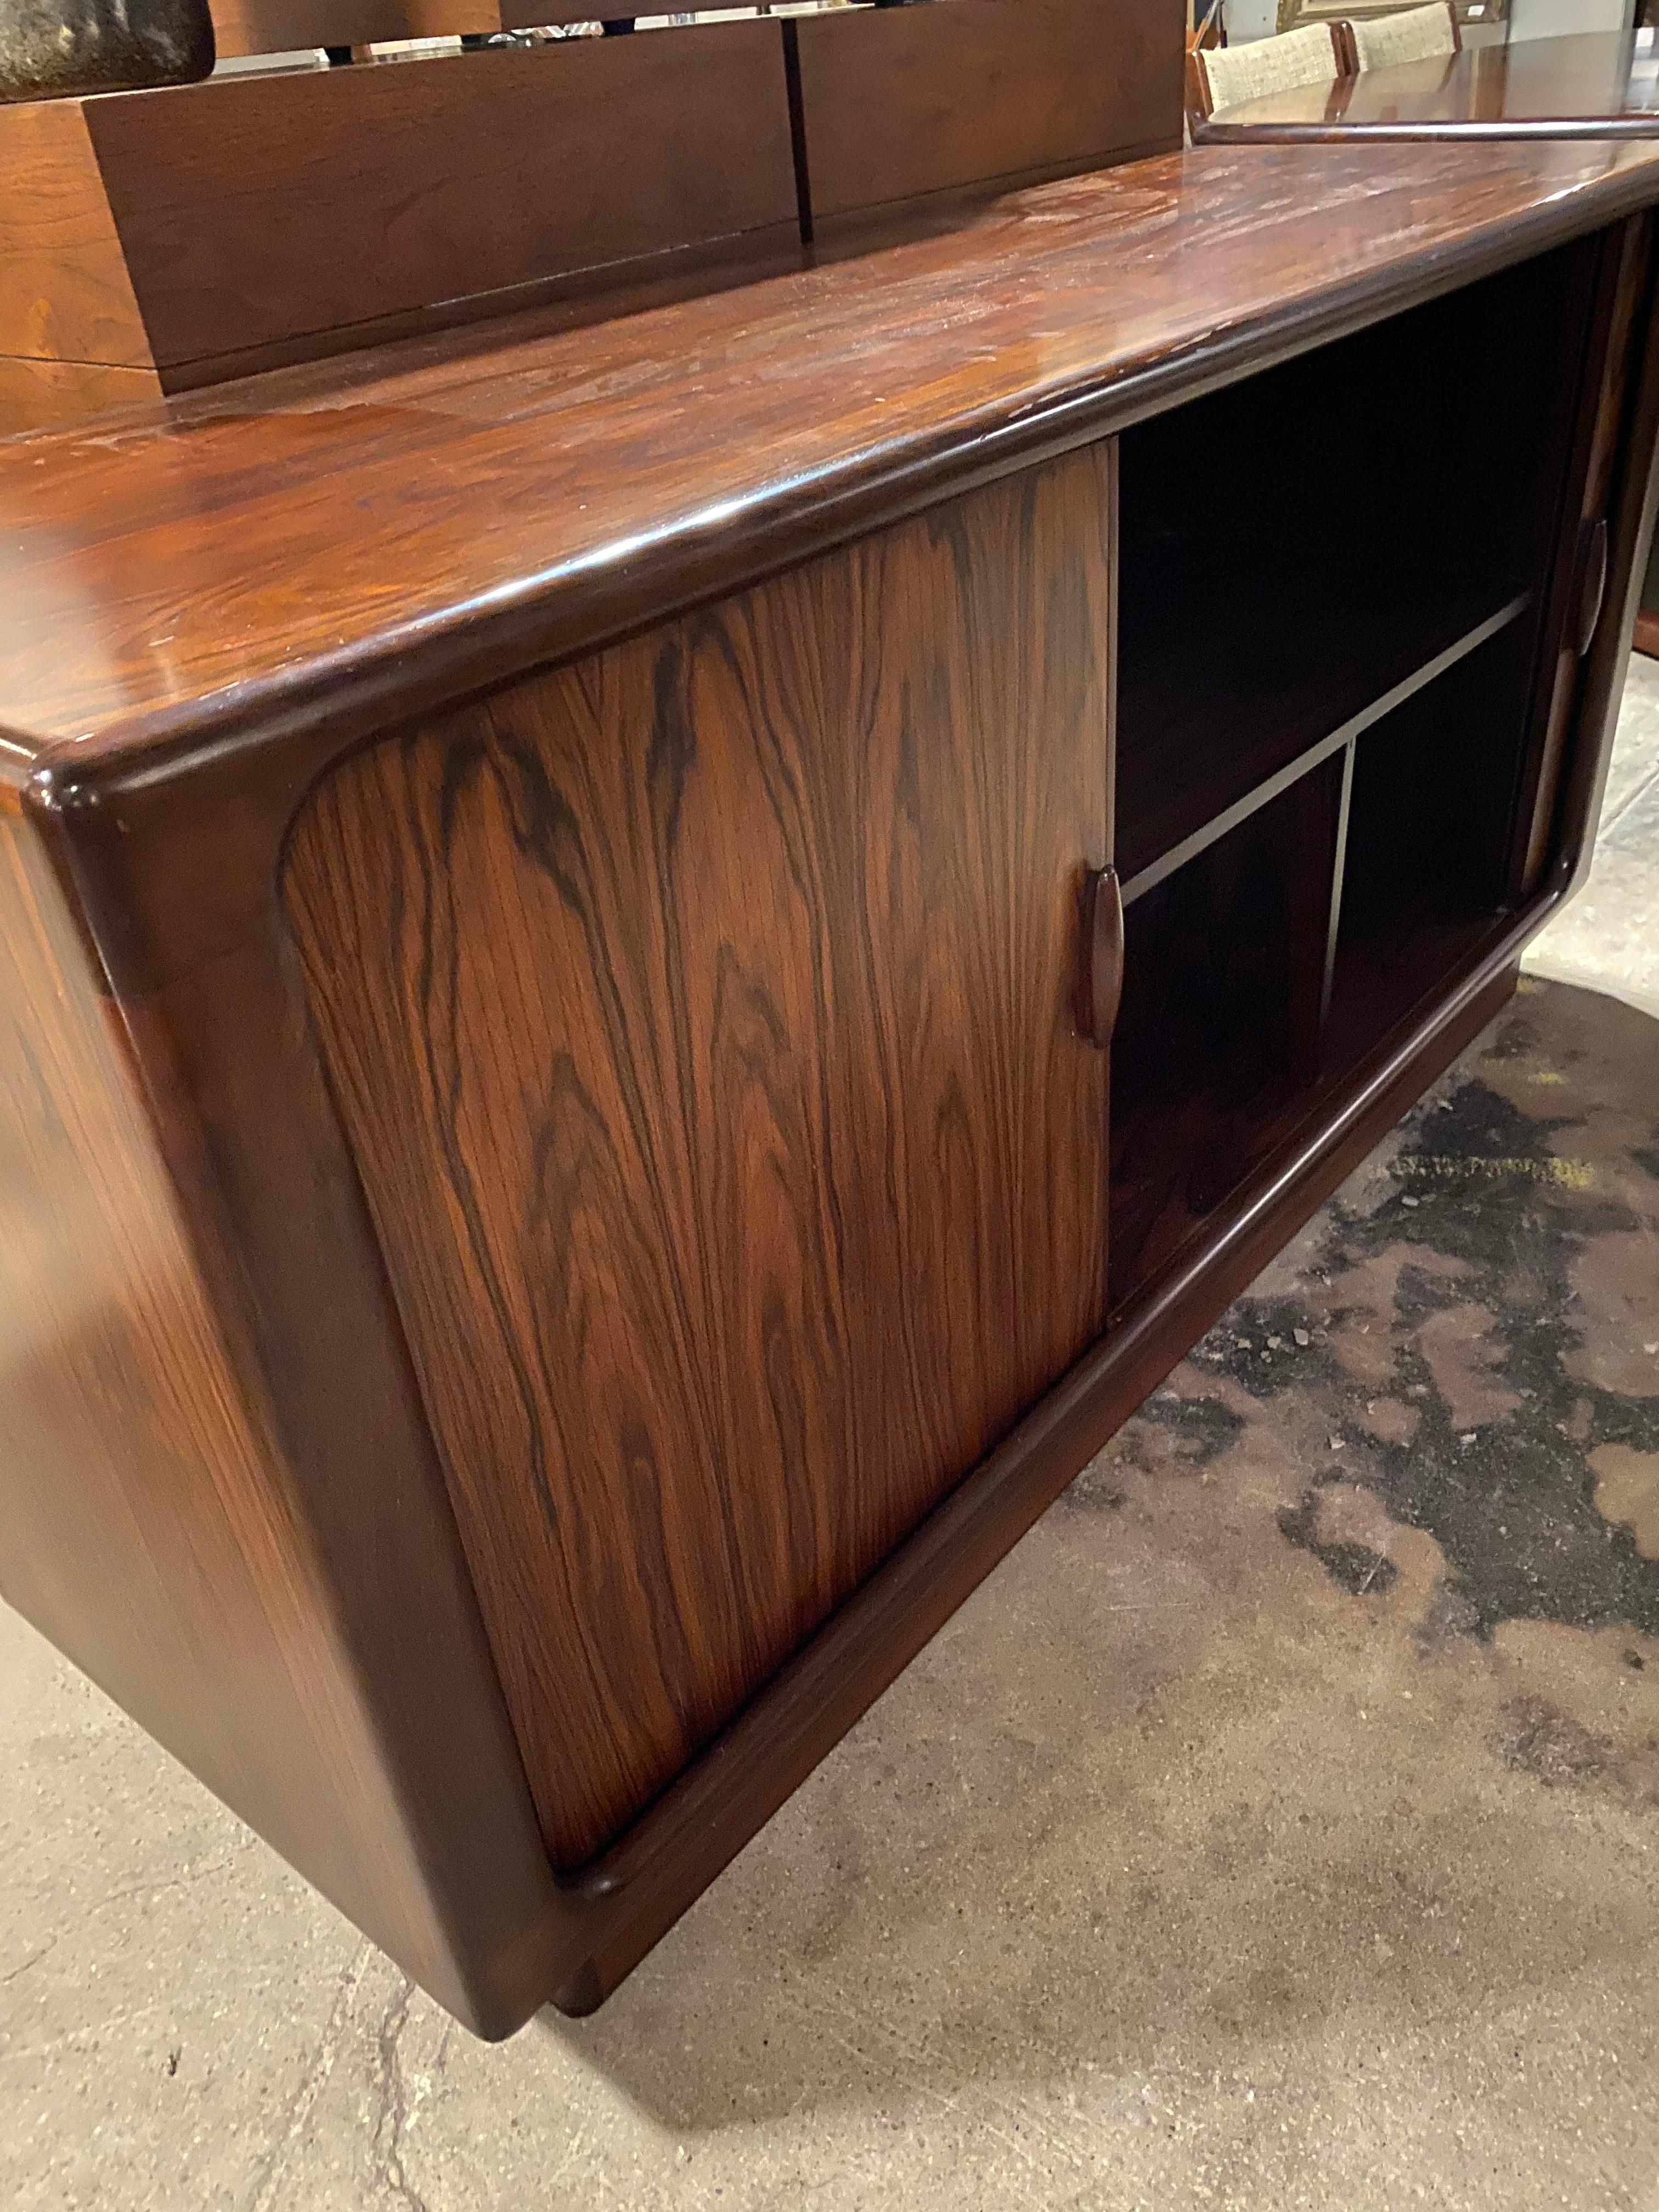 This vintage Danish modern rosewood credenza by Dyrlund is in very good condition overall. Features smooth sliding tambour doors. Plinth base. Interior drawers and shelves for storage.
Denmark, circa 1970s.
Dimensions:
51.5